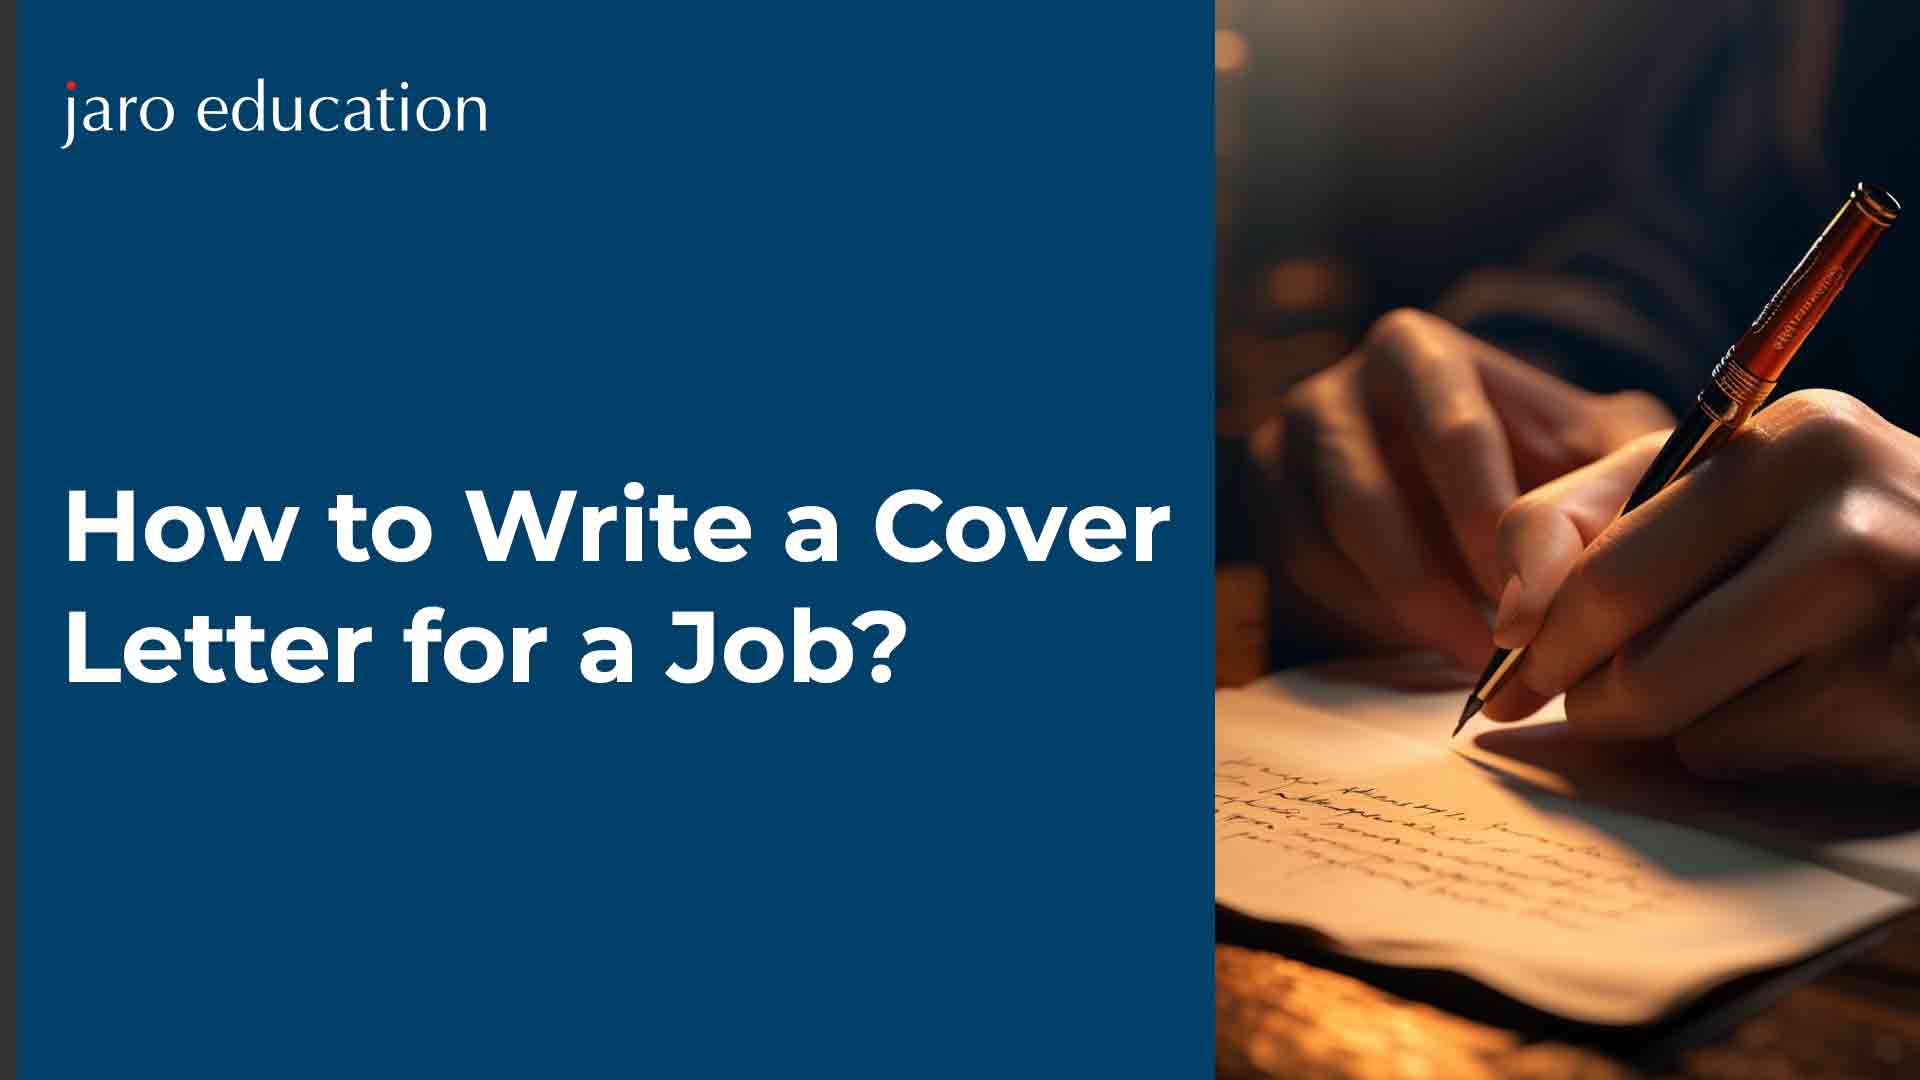 How to Write a Cover Letter for a Job